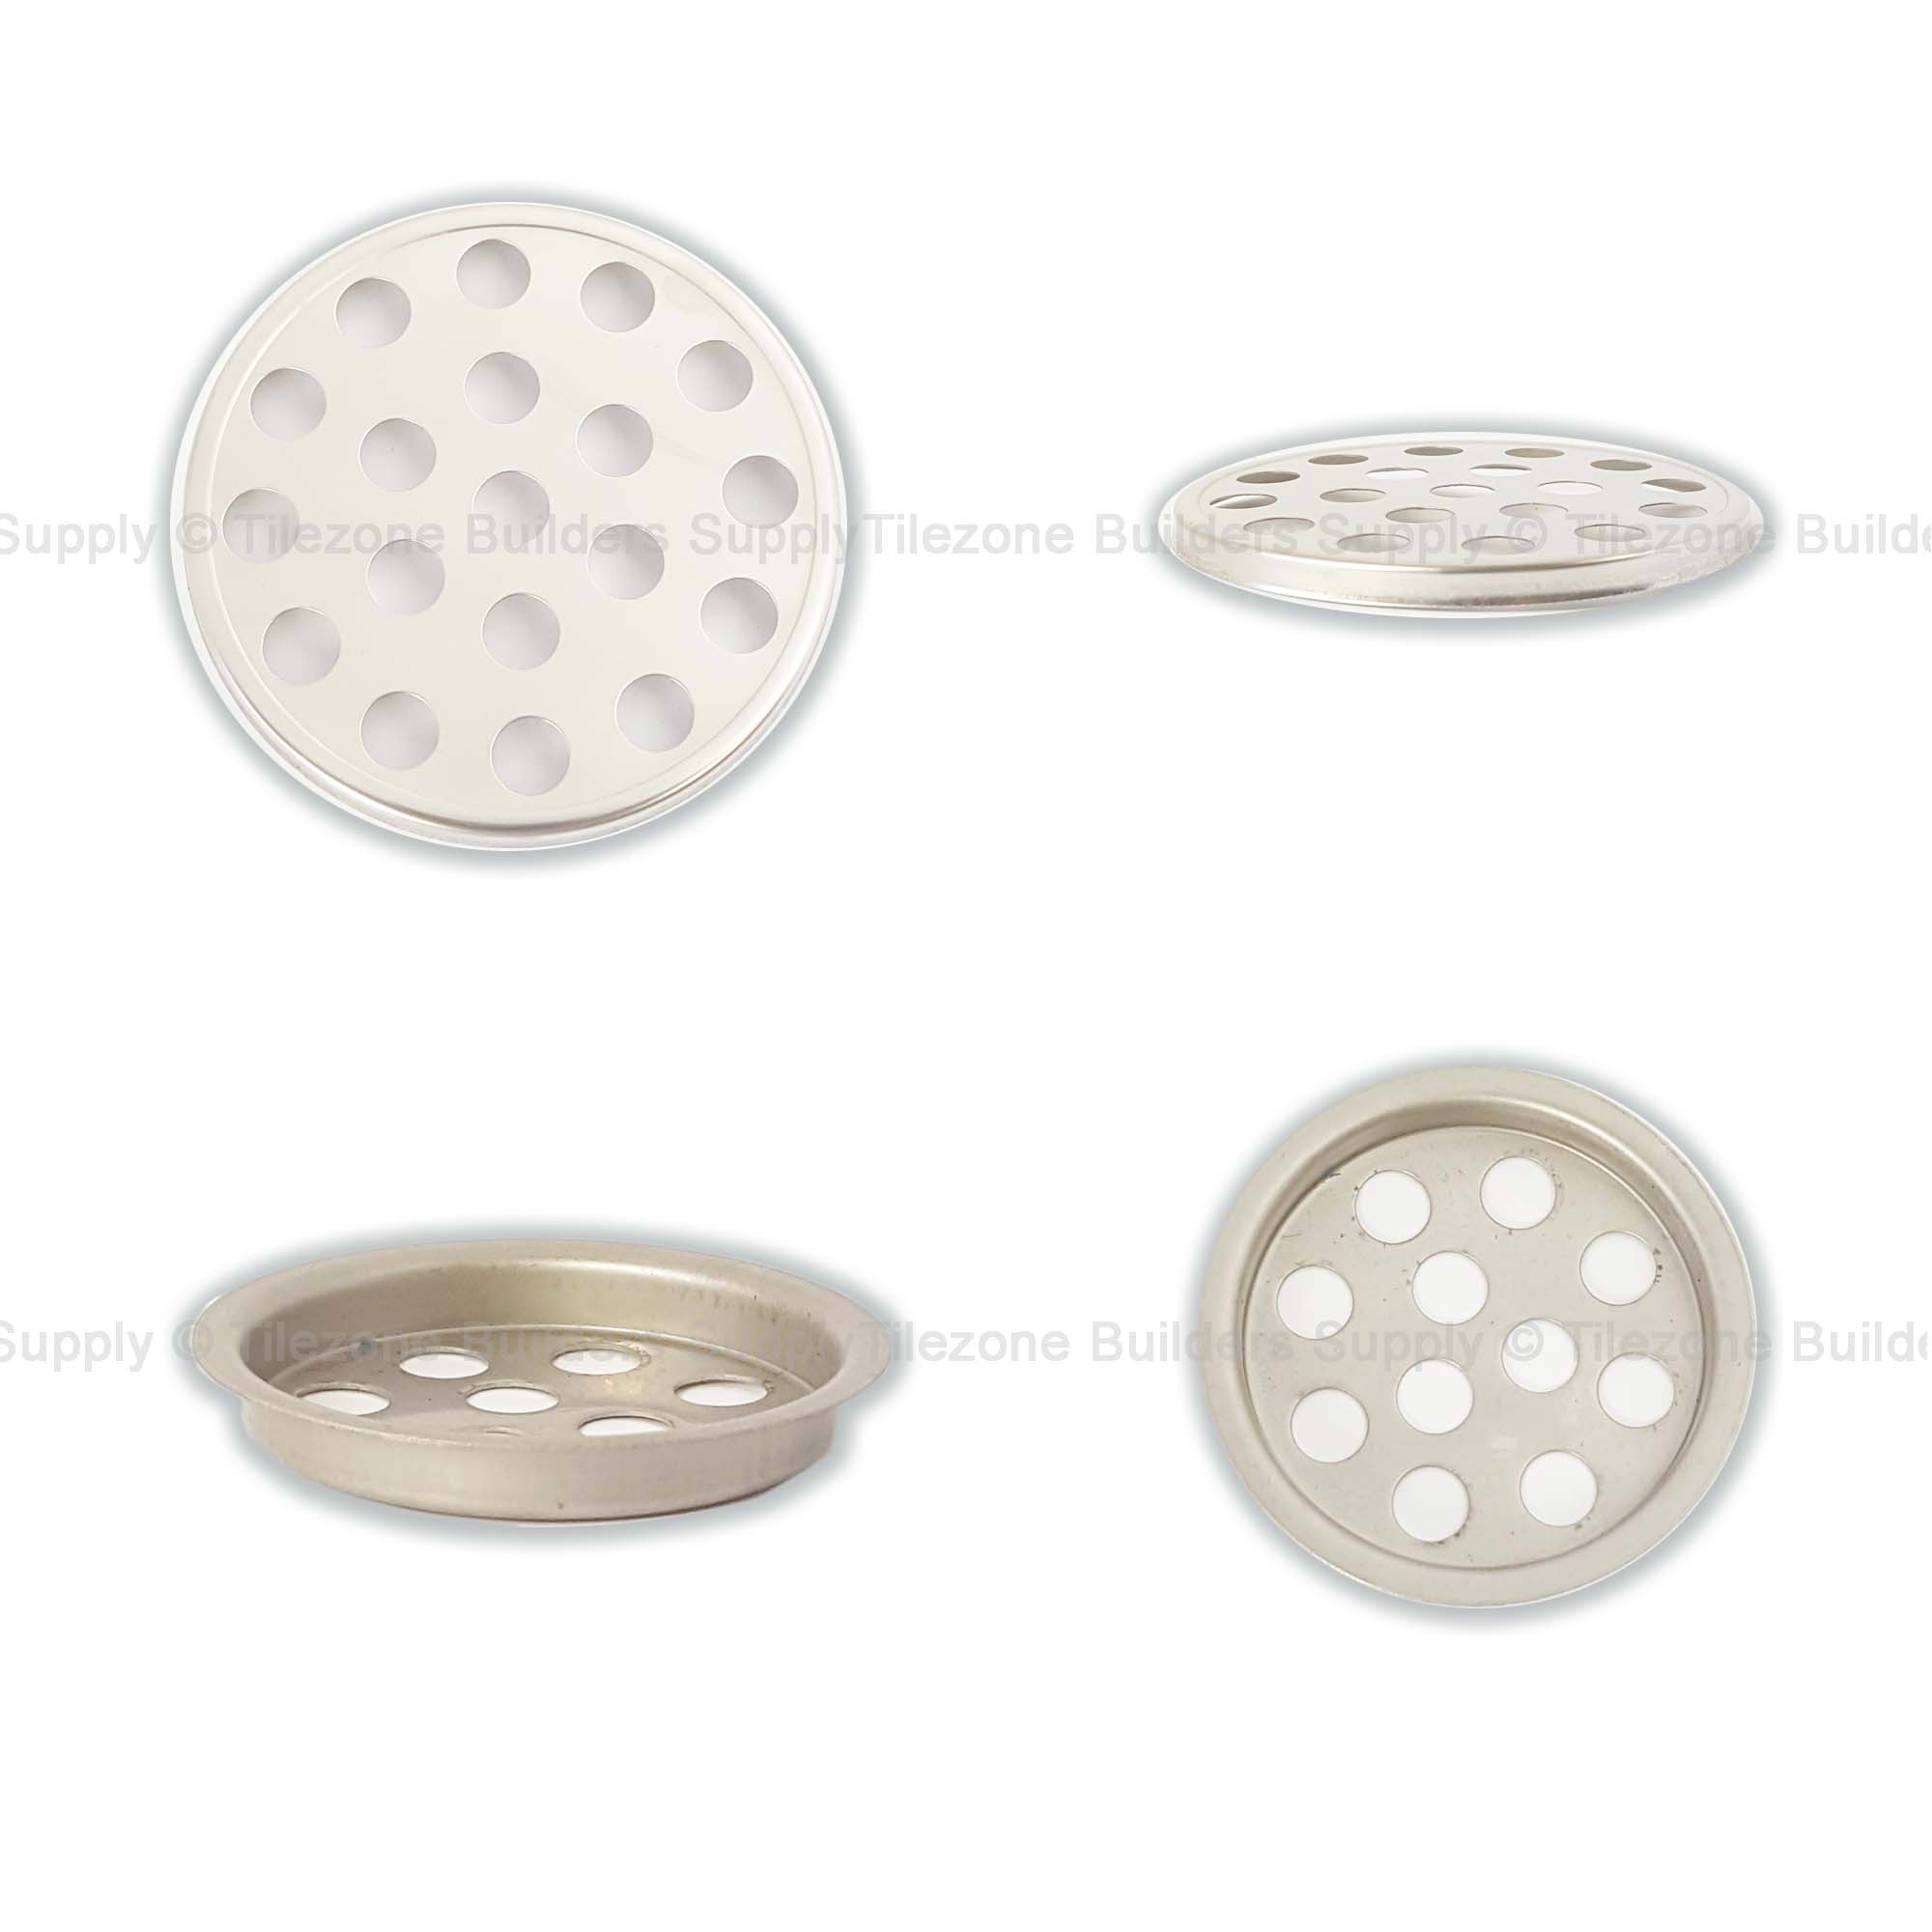 Tz 4 X 4 Inches Stainless Floor Drain Strainer With Basket